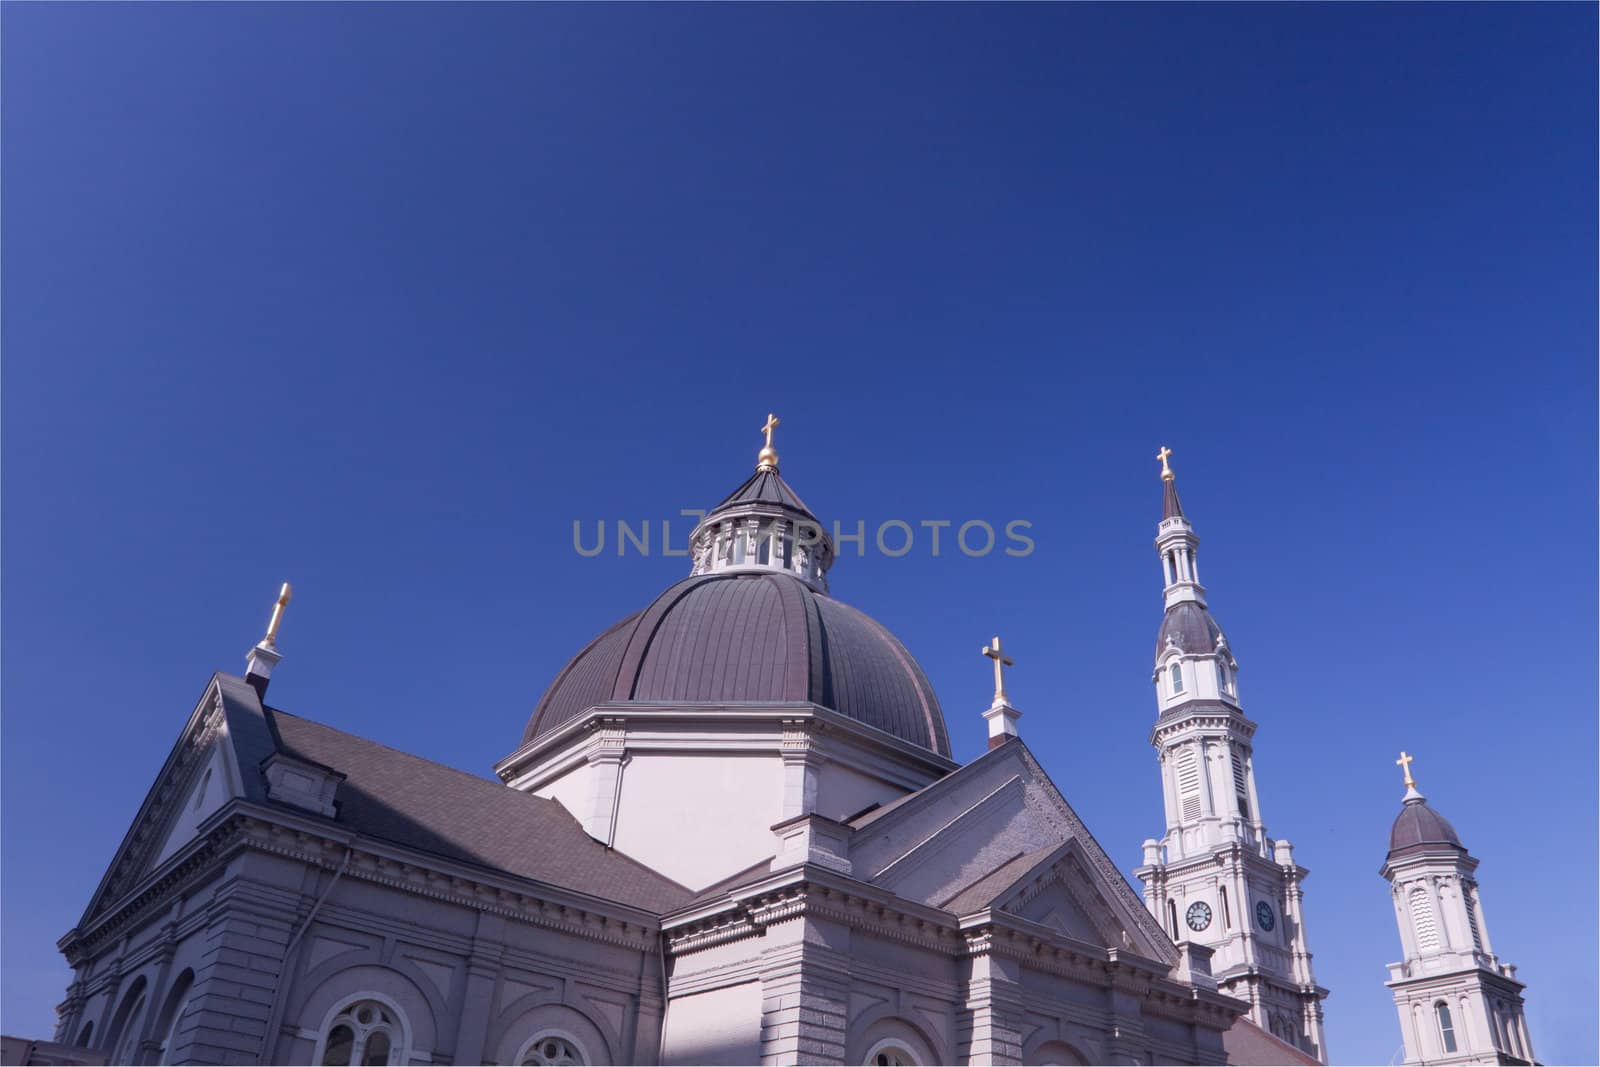 Five Cathedral Crosses on a California Cathedral against a deep blue sky